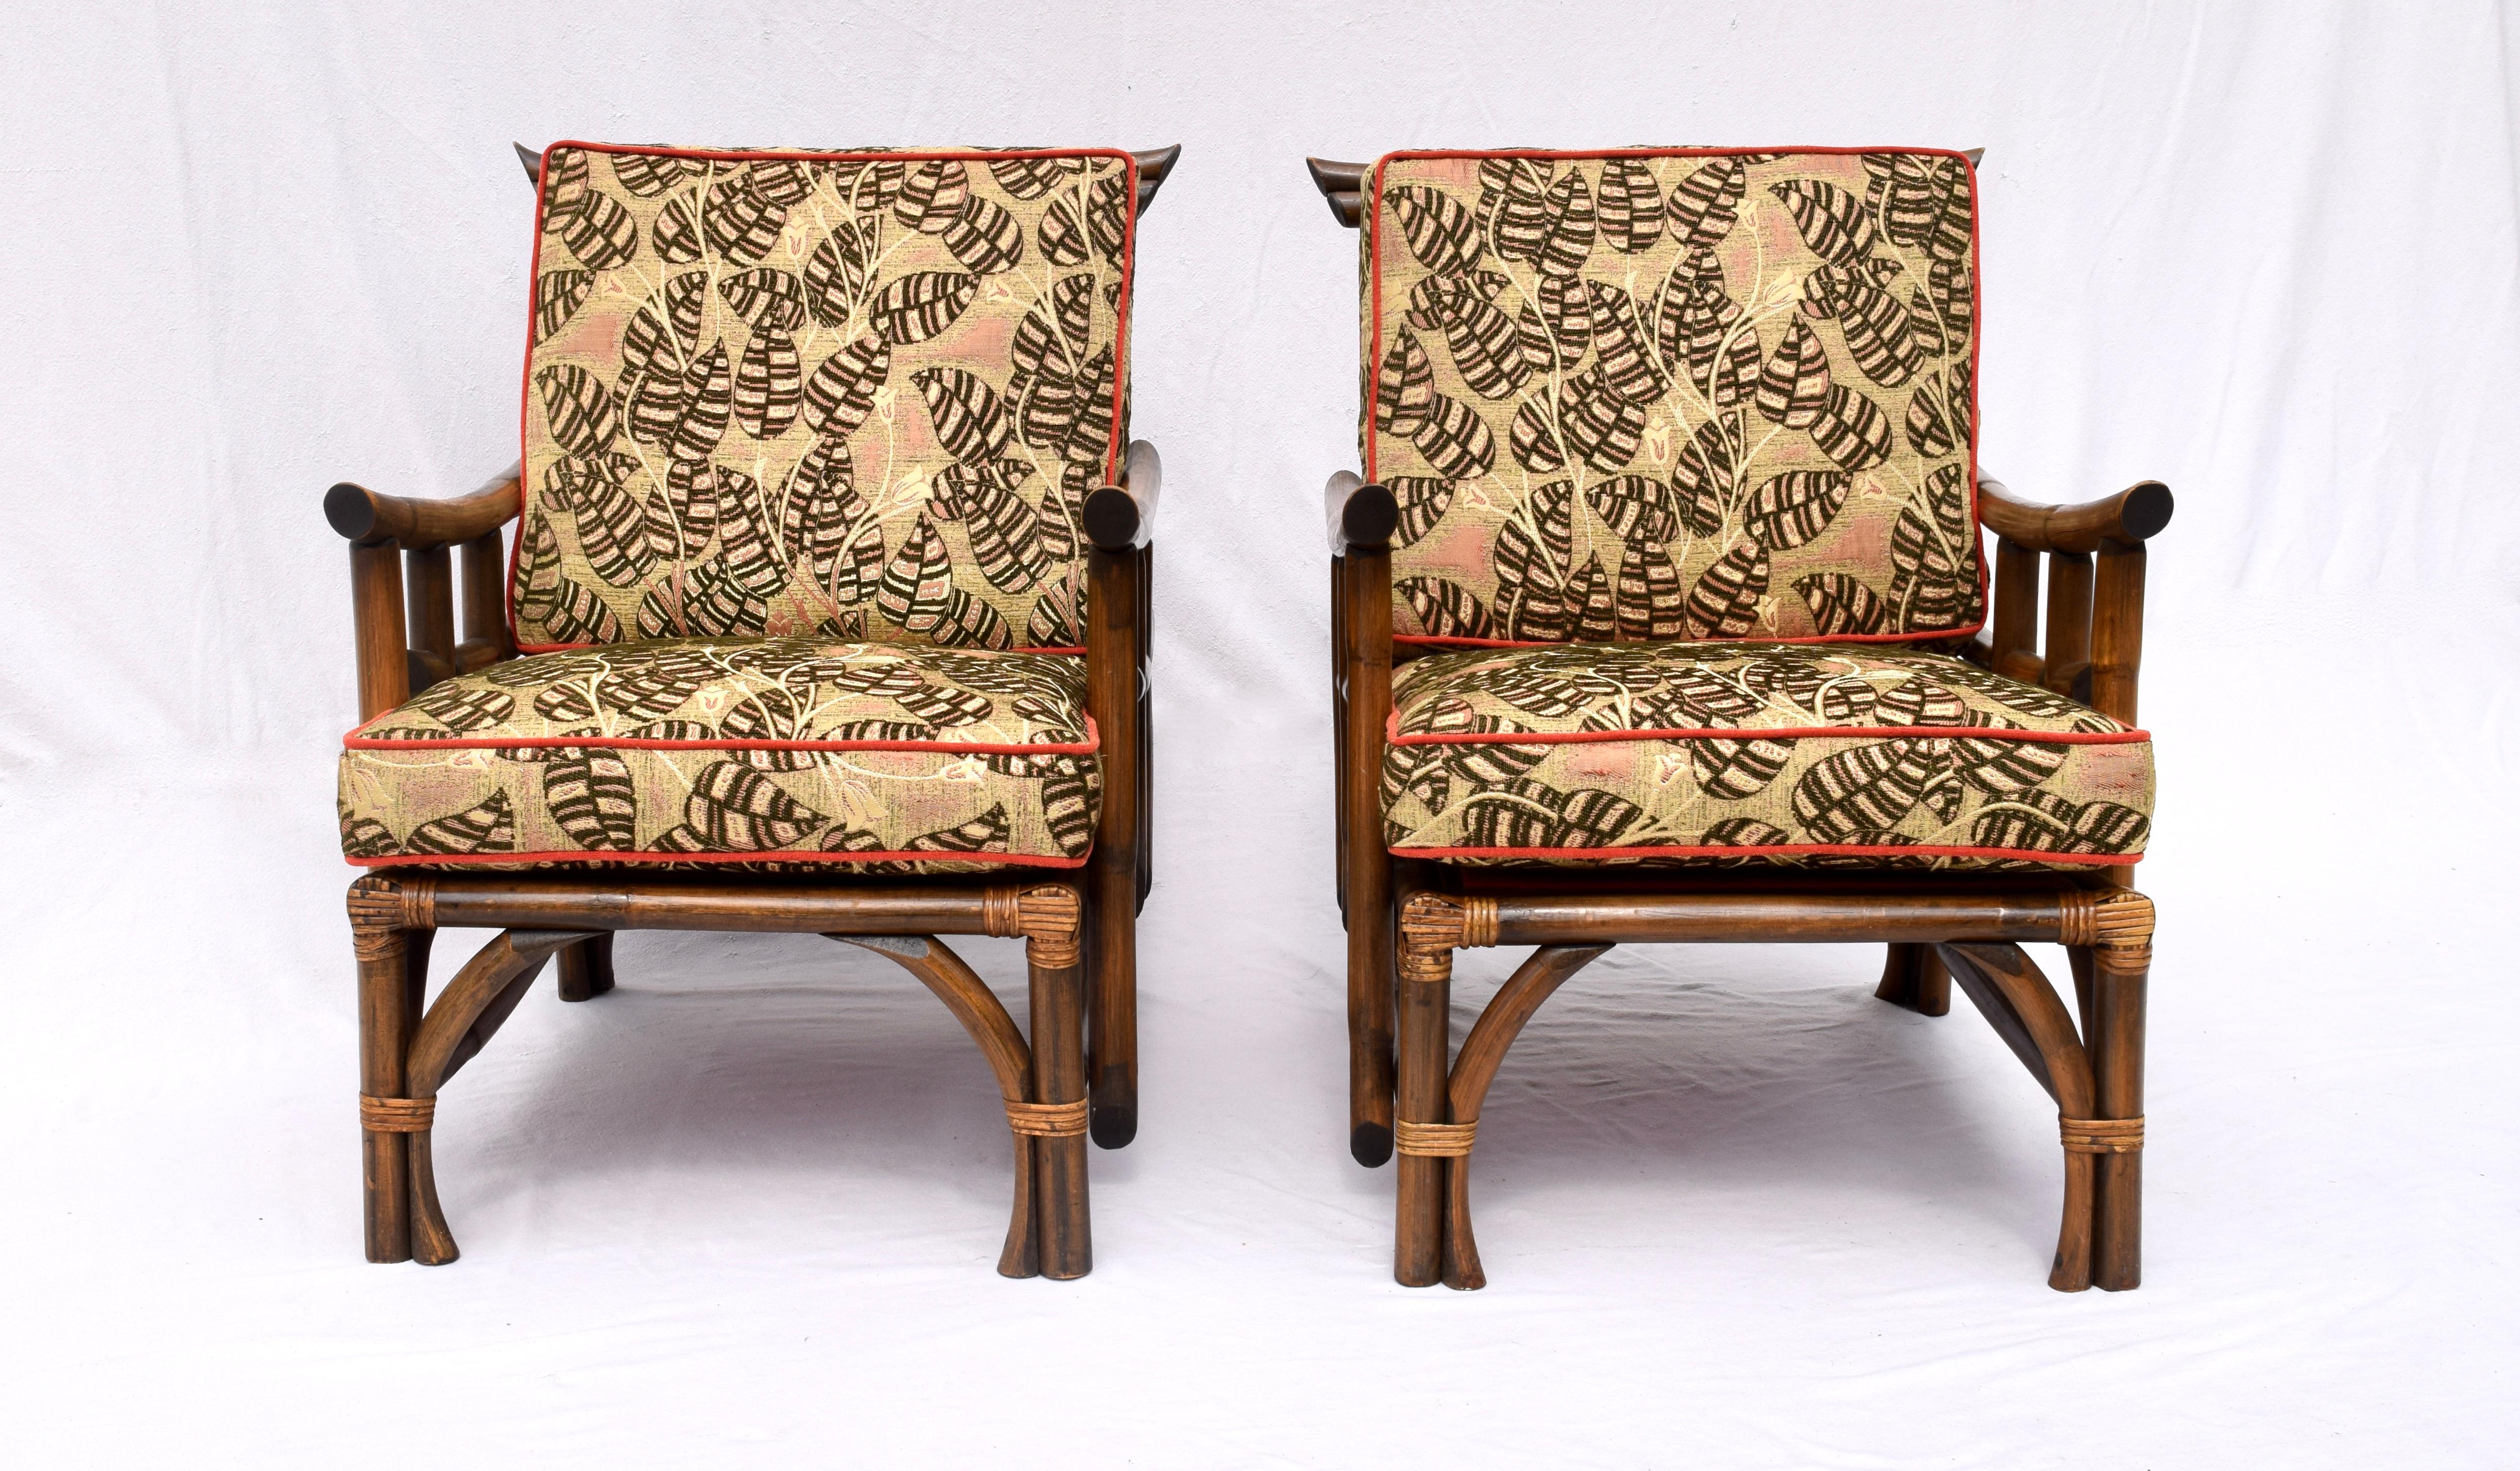 A rare pair of Pagoda style lounge chairs by Calif-Asia Company Los Angeles California, of rattan, raffia, hardwood seats and original spring construction. The matching footstool retains the Calif-Asia tag. In marvelous vintage condition the set has